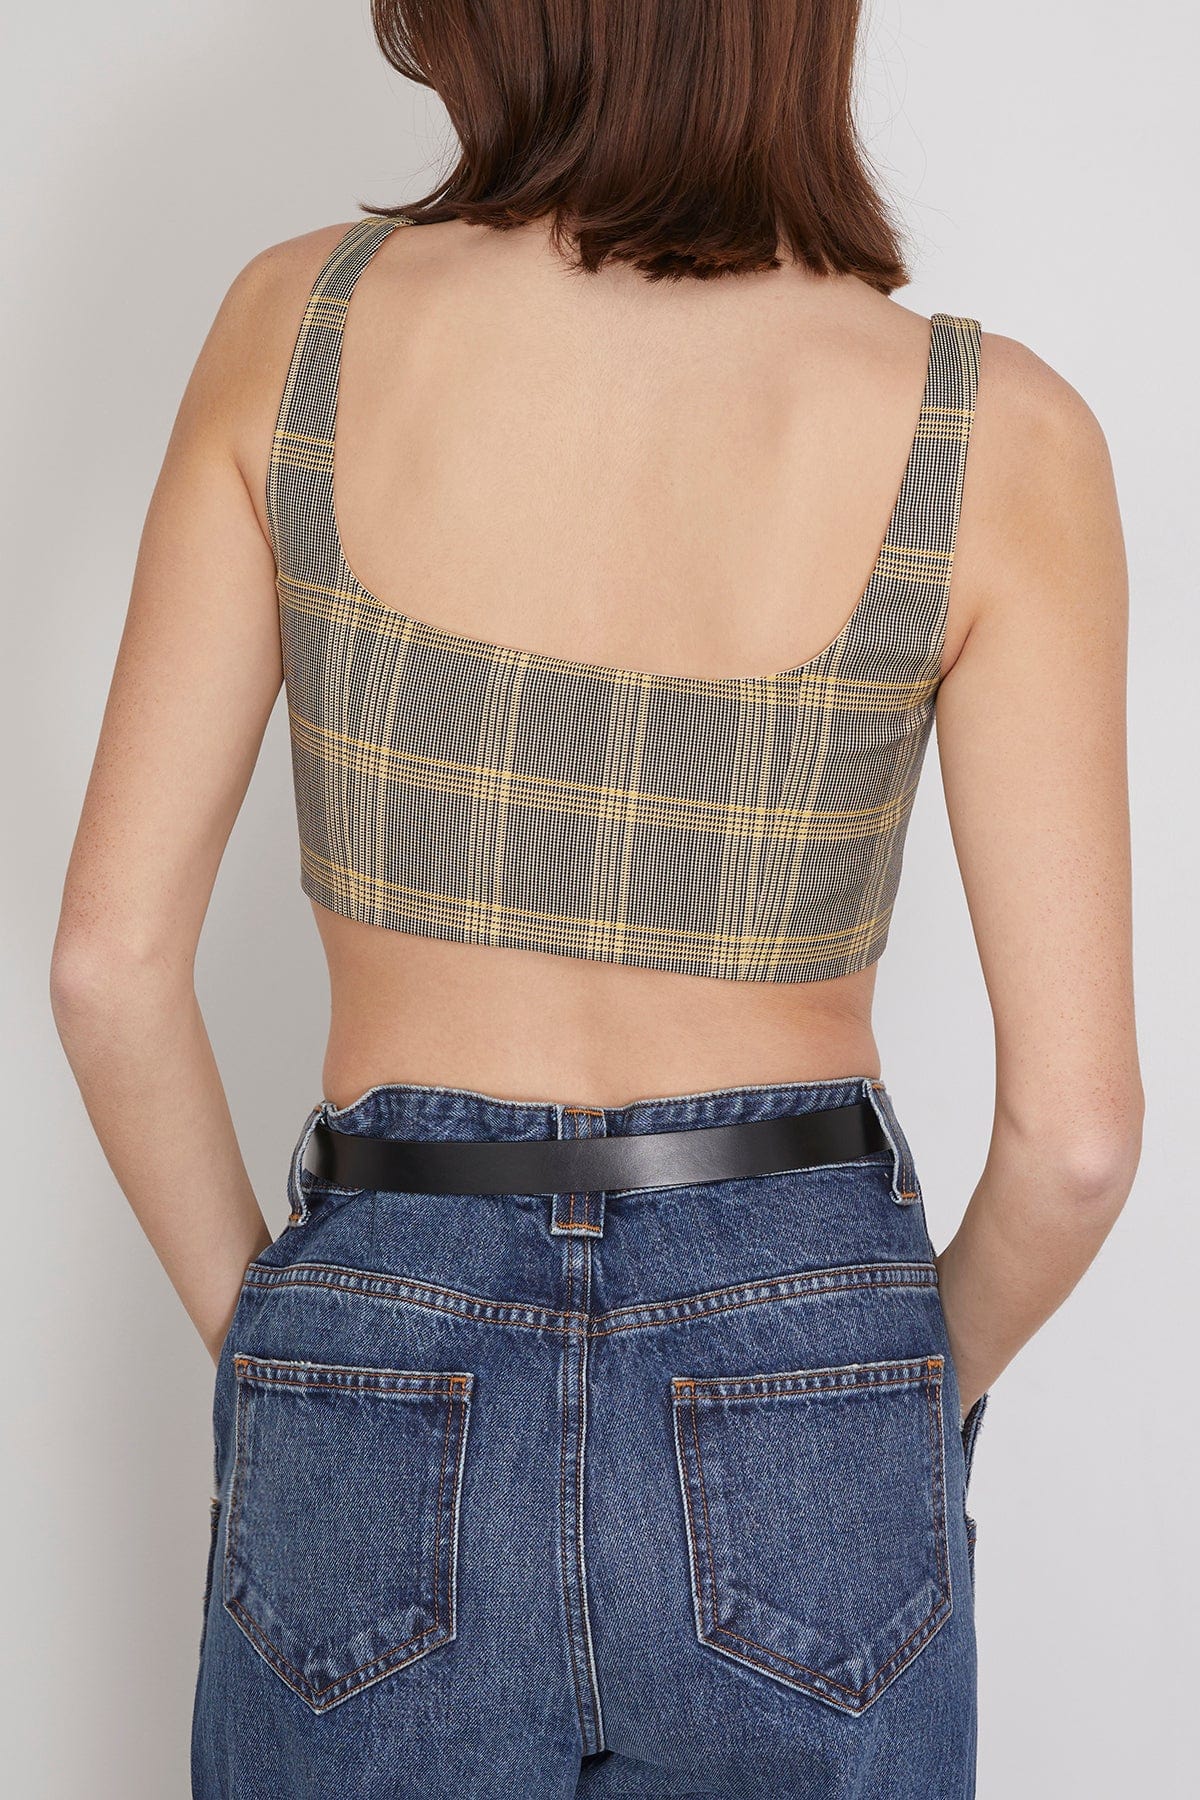 Marni Tops Technical Check Wool Cropped Top in Lemmon Marni Technical Check Wool Cropped Top in Lemmon